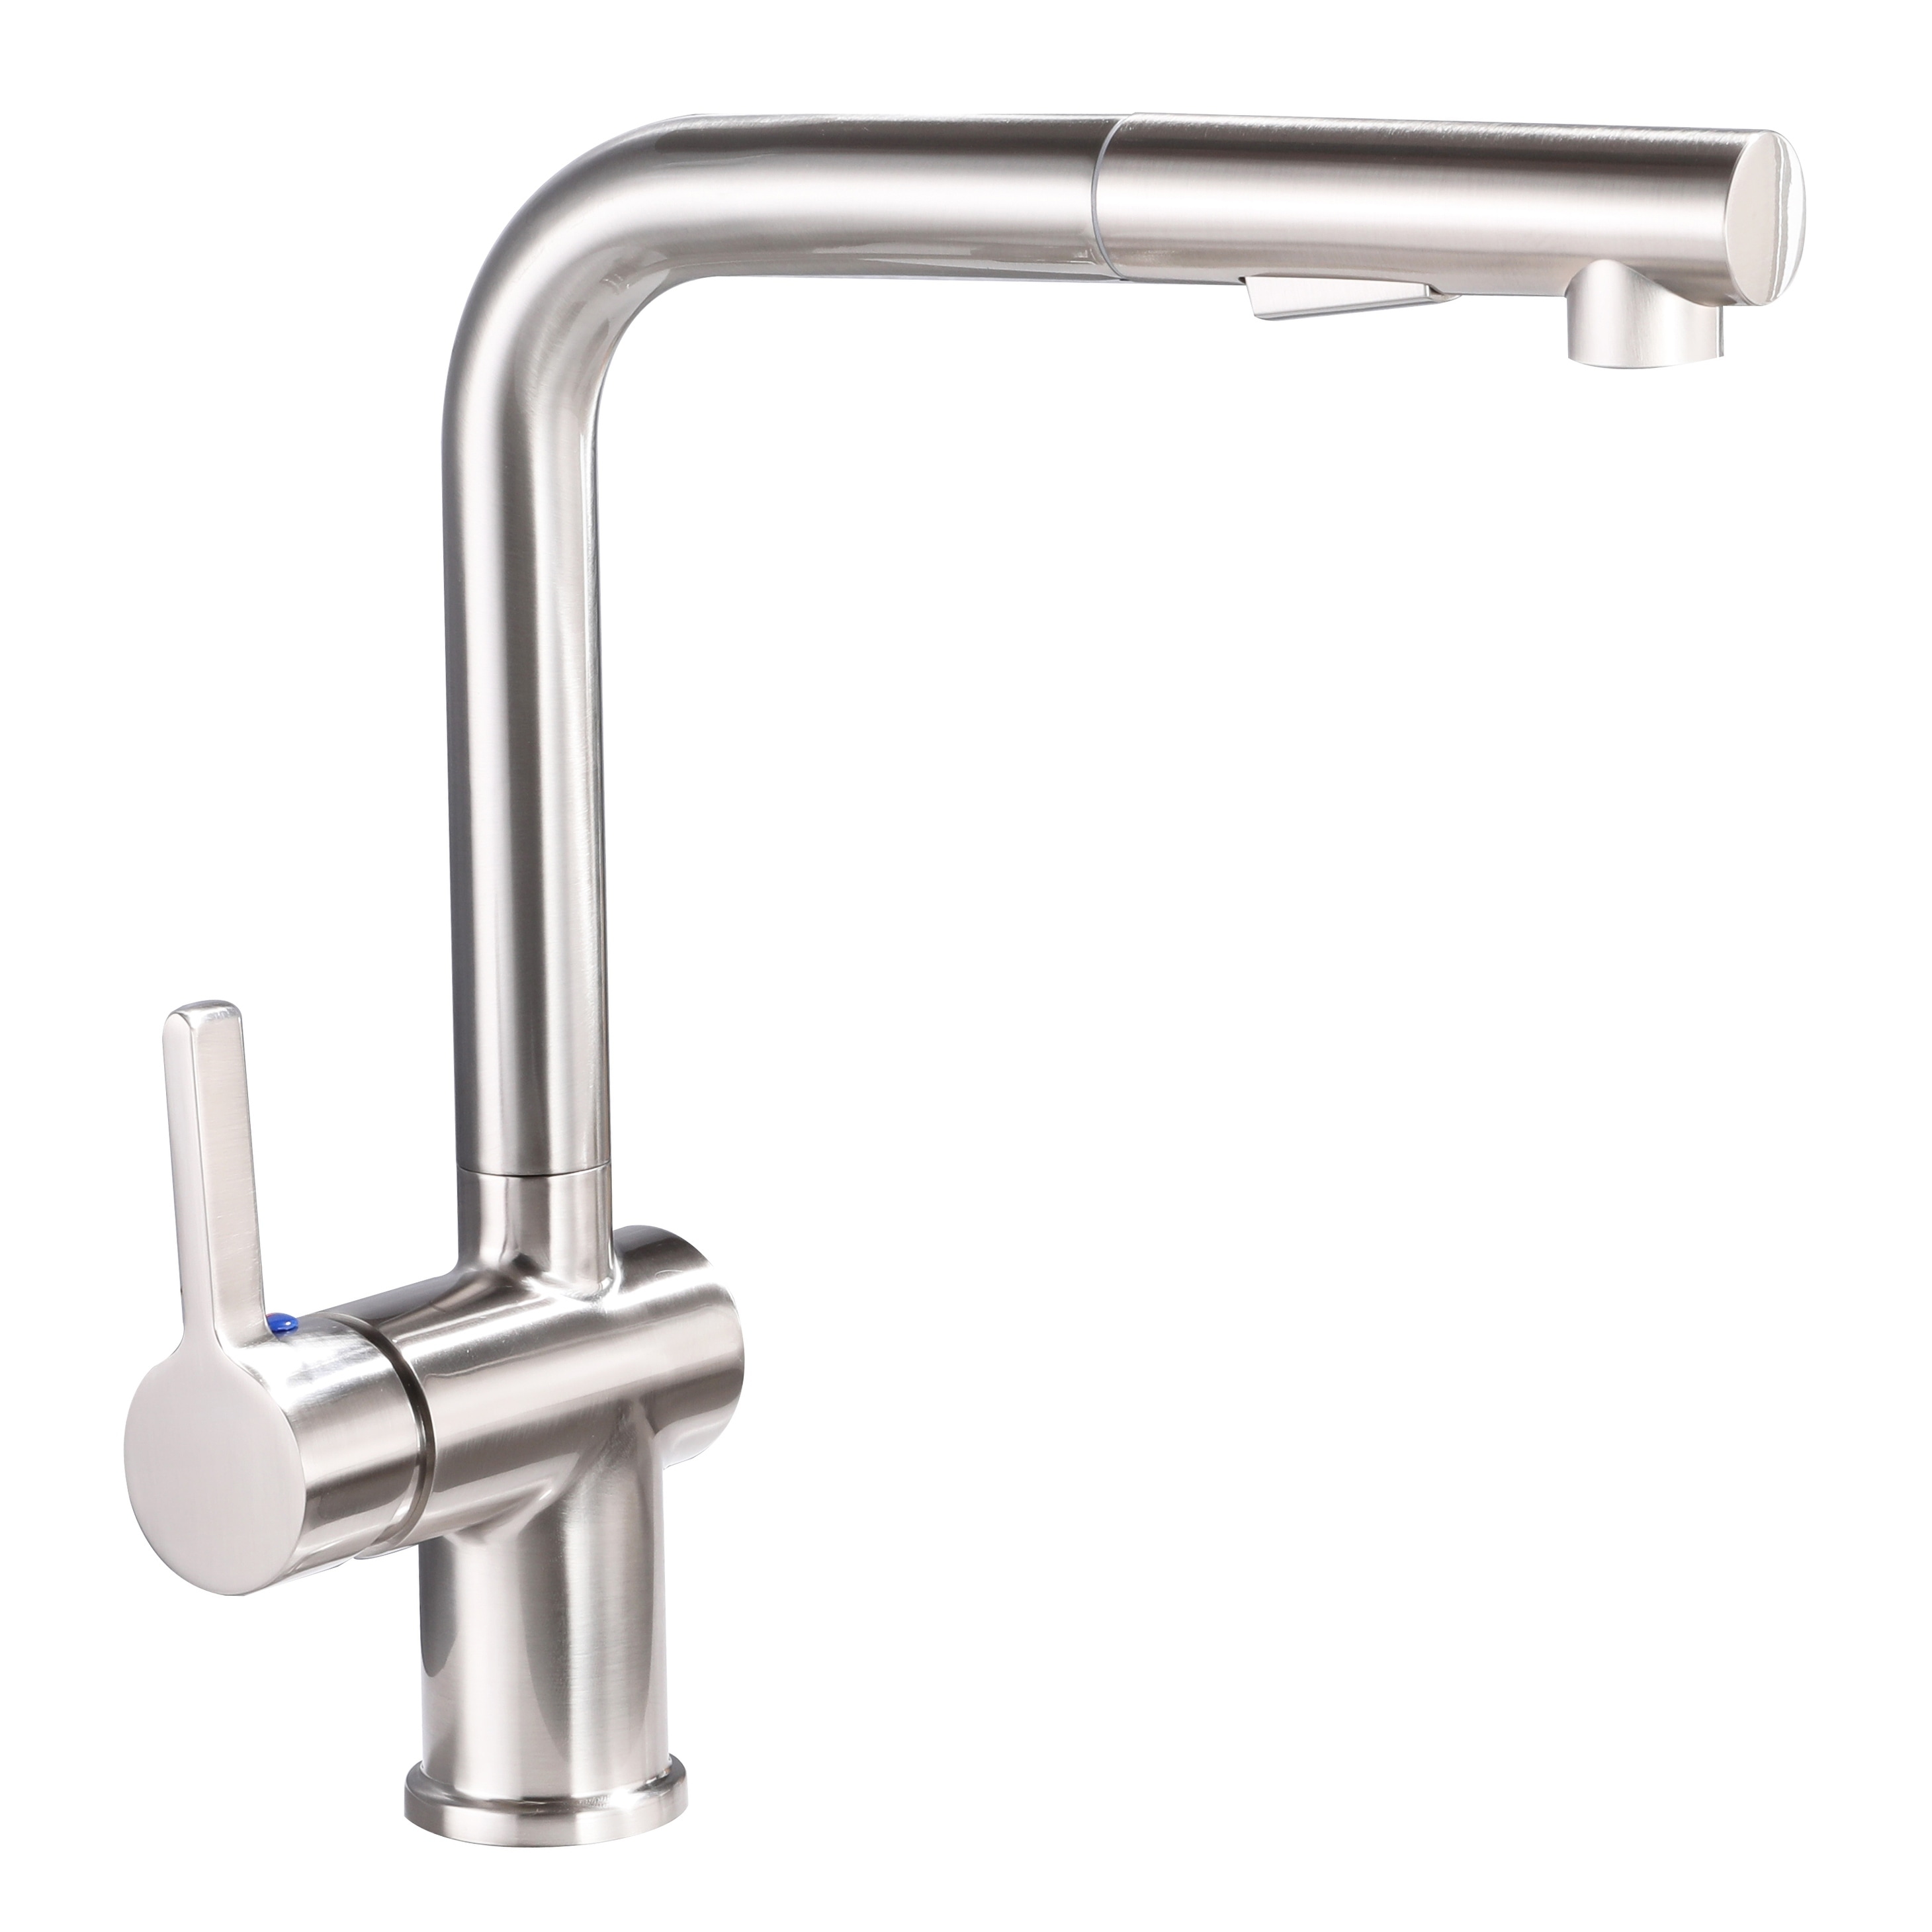 Shop Vanity Art Pull Out Kitchen Faucet Brushed Nickel Finish High